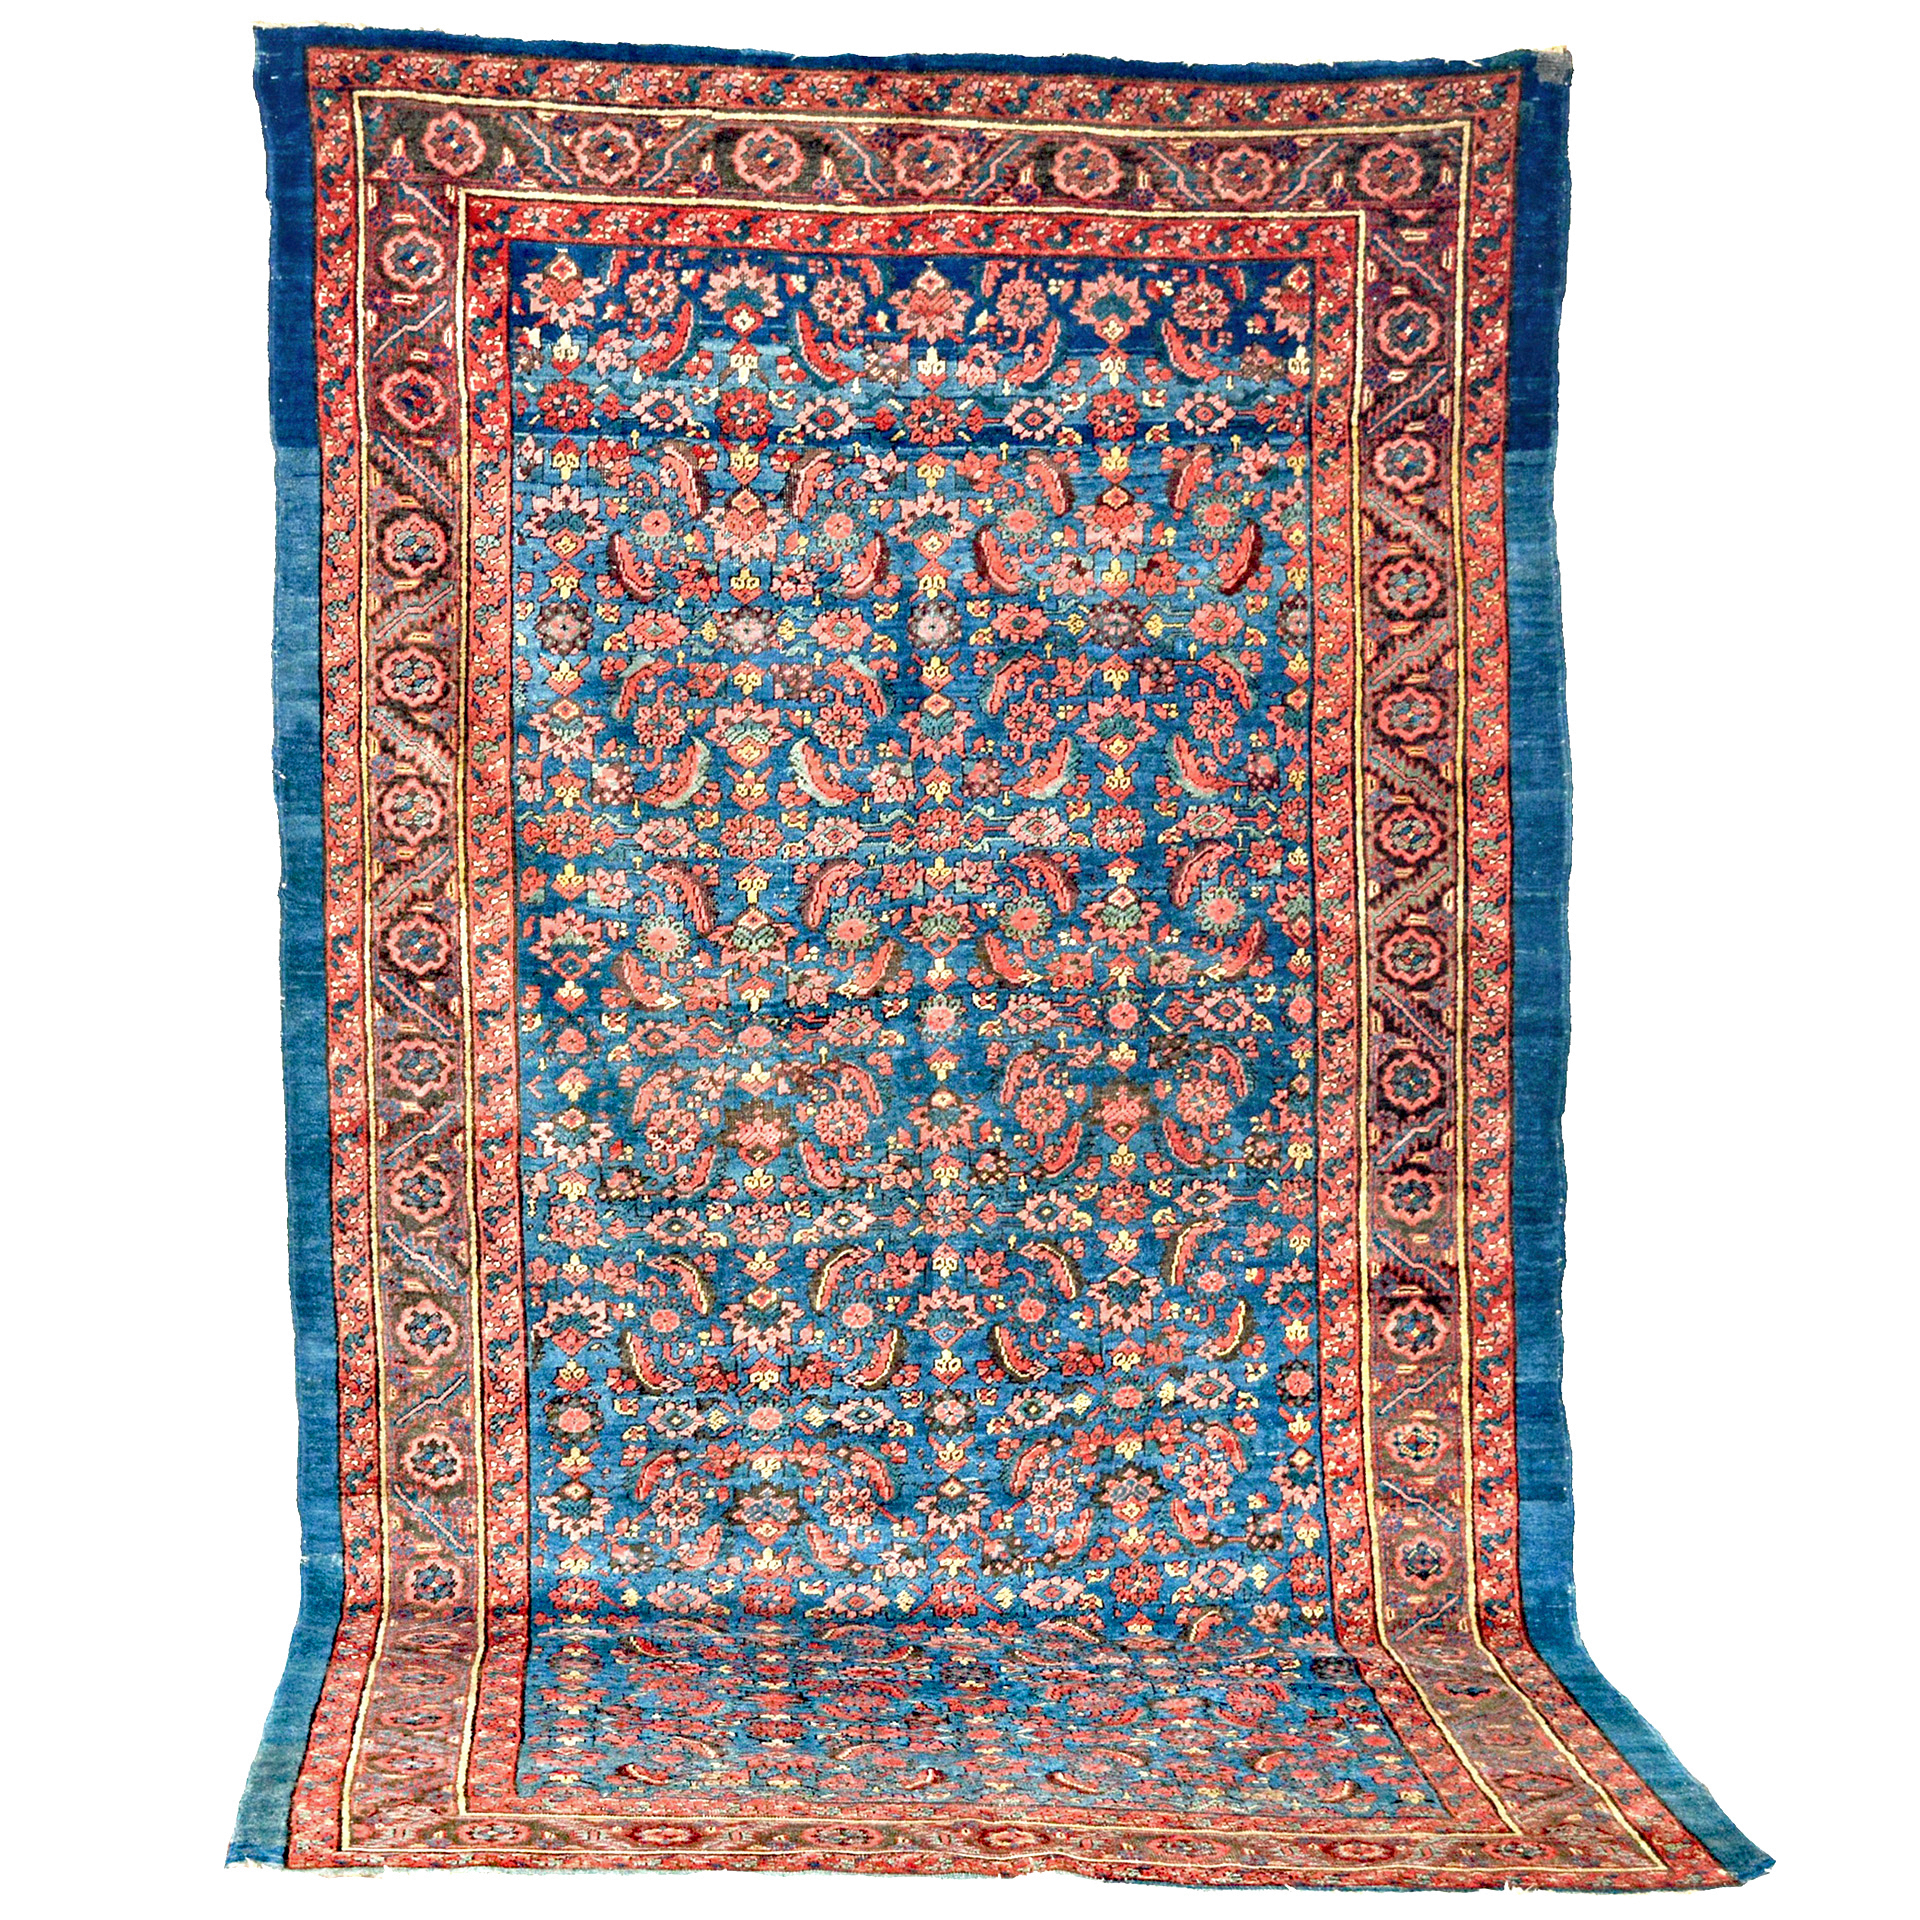 Antique Bashaish gallery carpet with the classical Herati design on an abrashed (variegated) denim blue field, Douglas Stock Gallery, antique Persian carpets Boston,MA area, antique Oriental rugs New England, decorative rugs New York